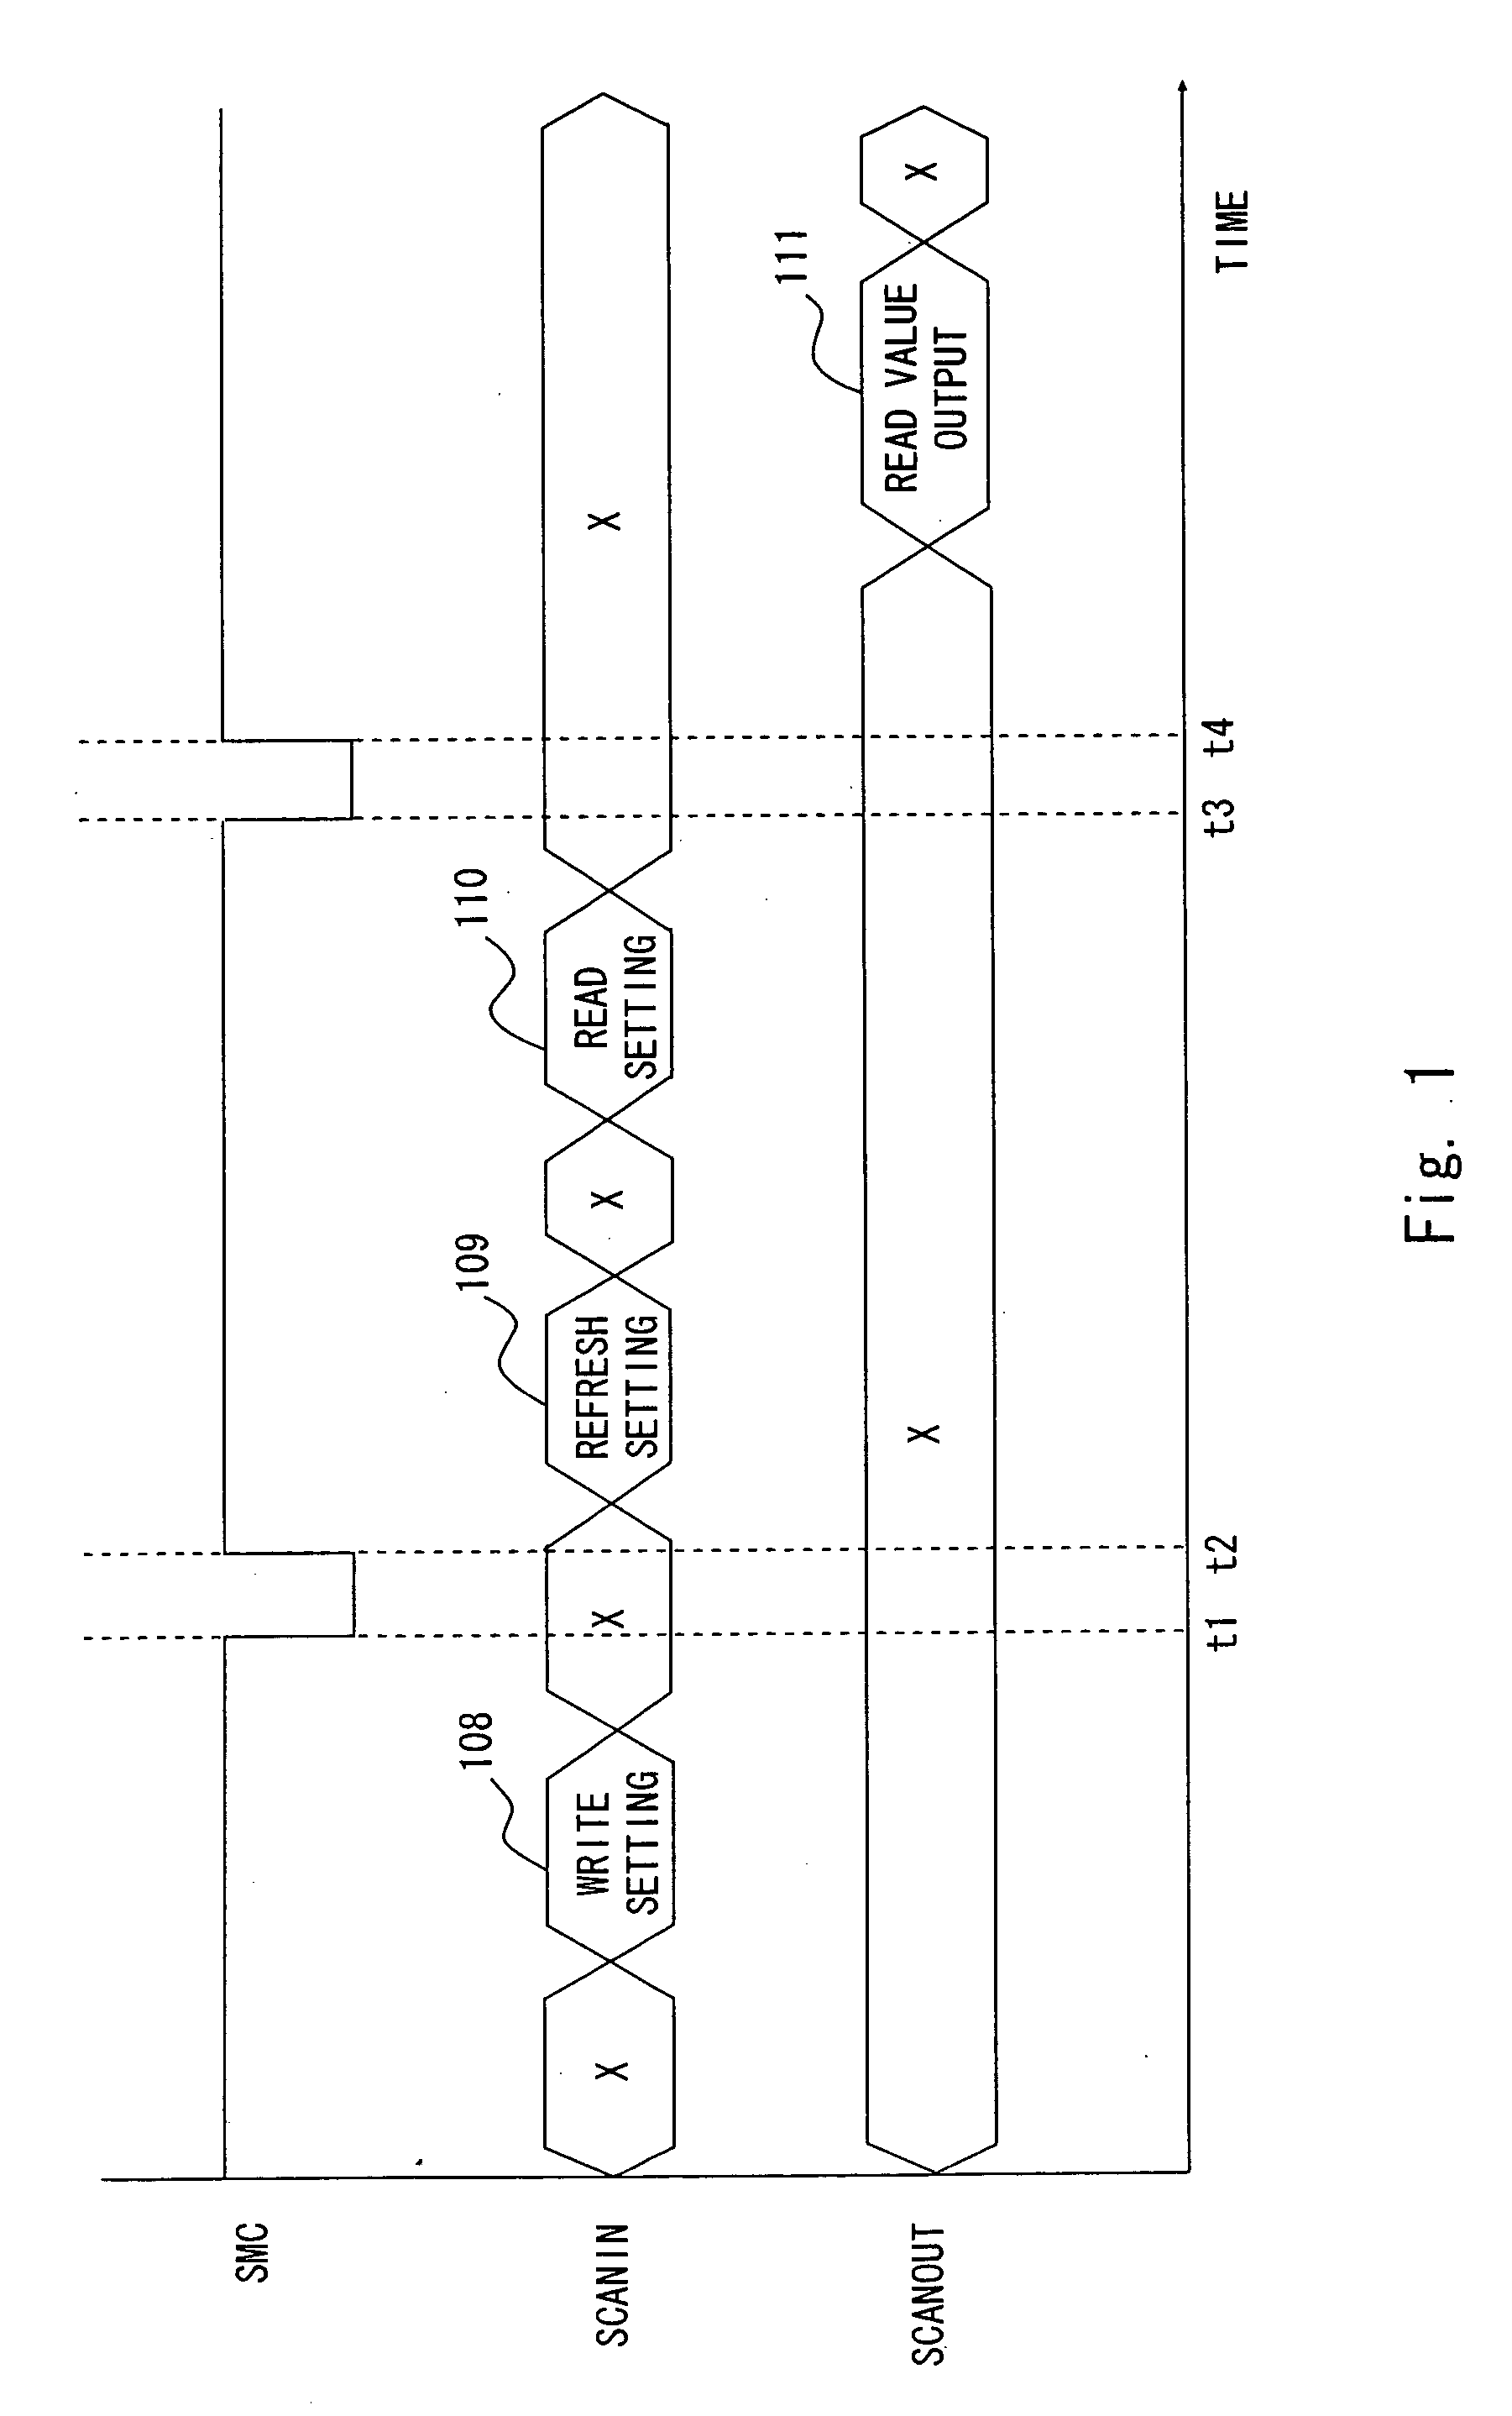 Test circuit and test method